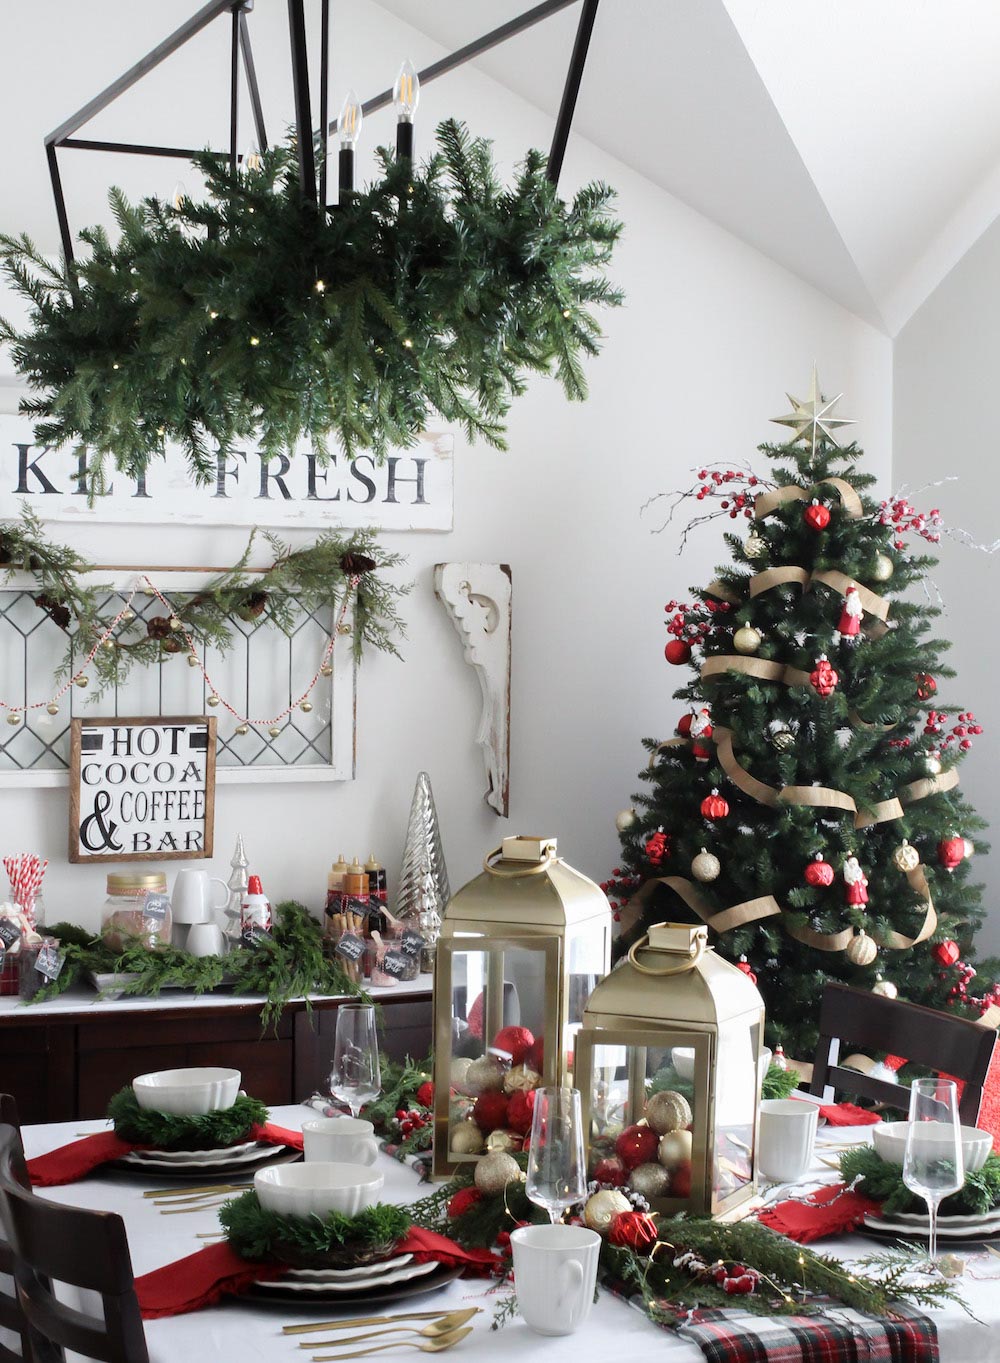 Angled shot of a holiday decorated dining room with a Christmas tree in the back corner